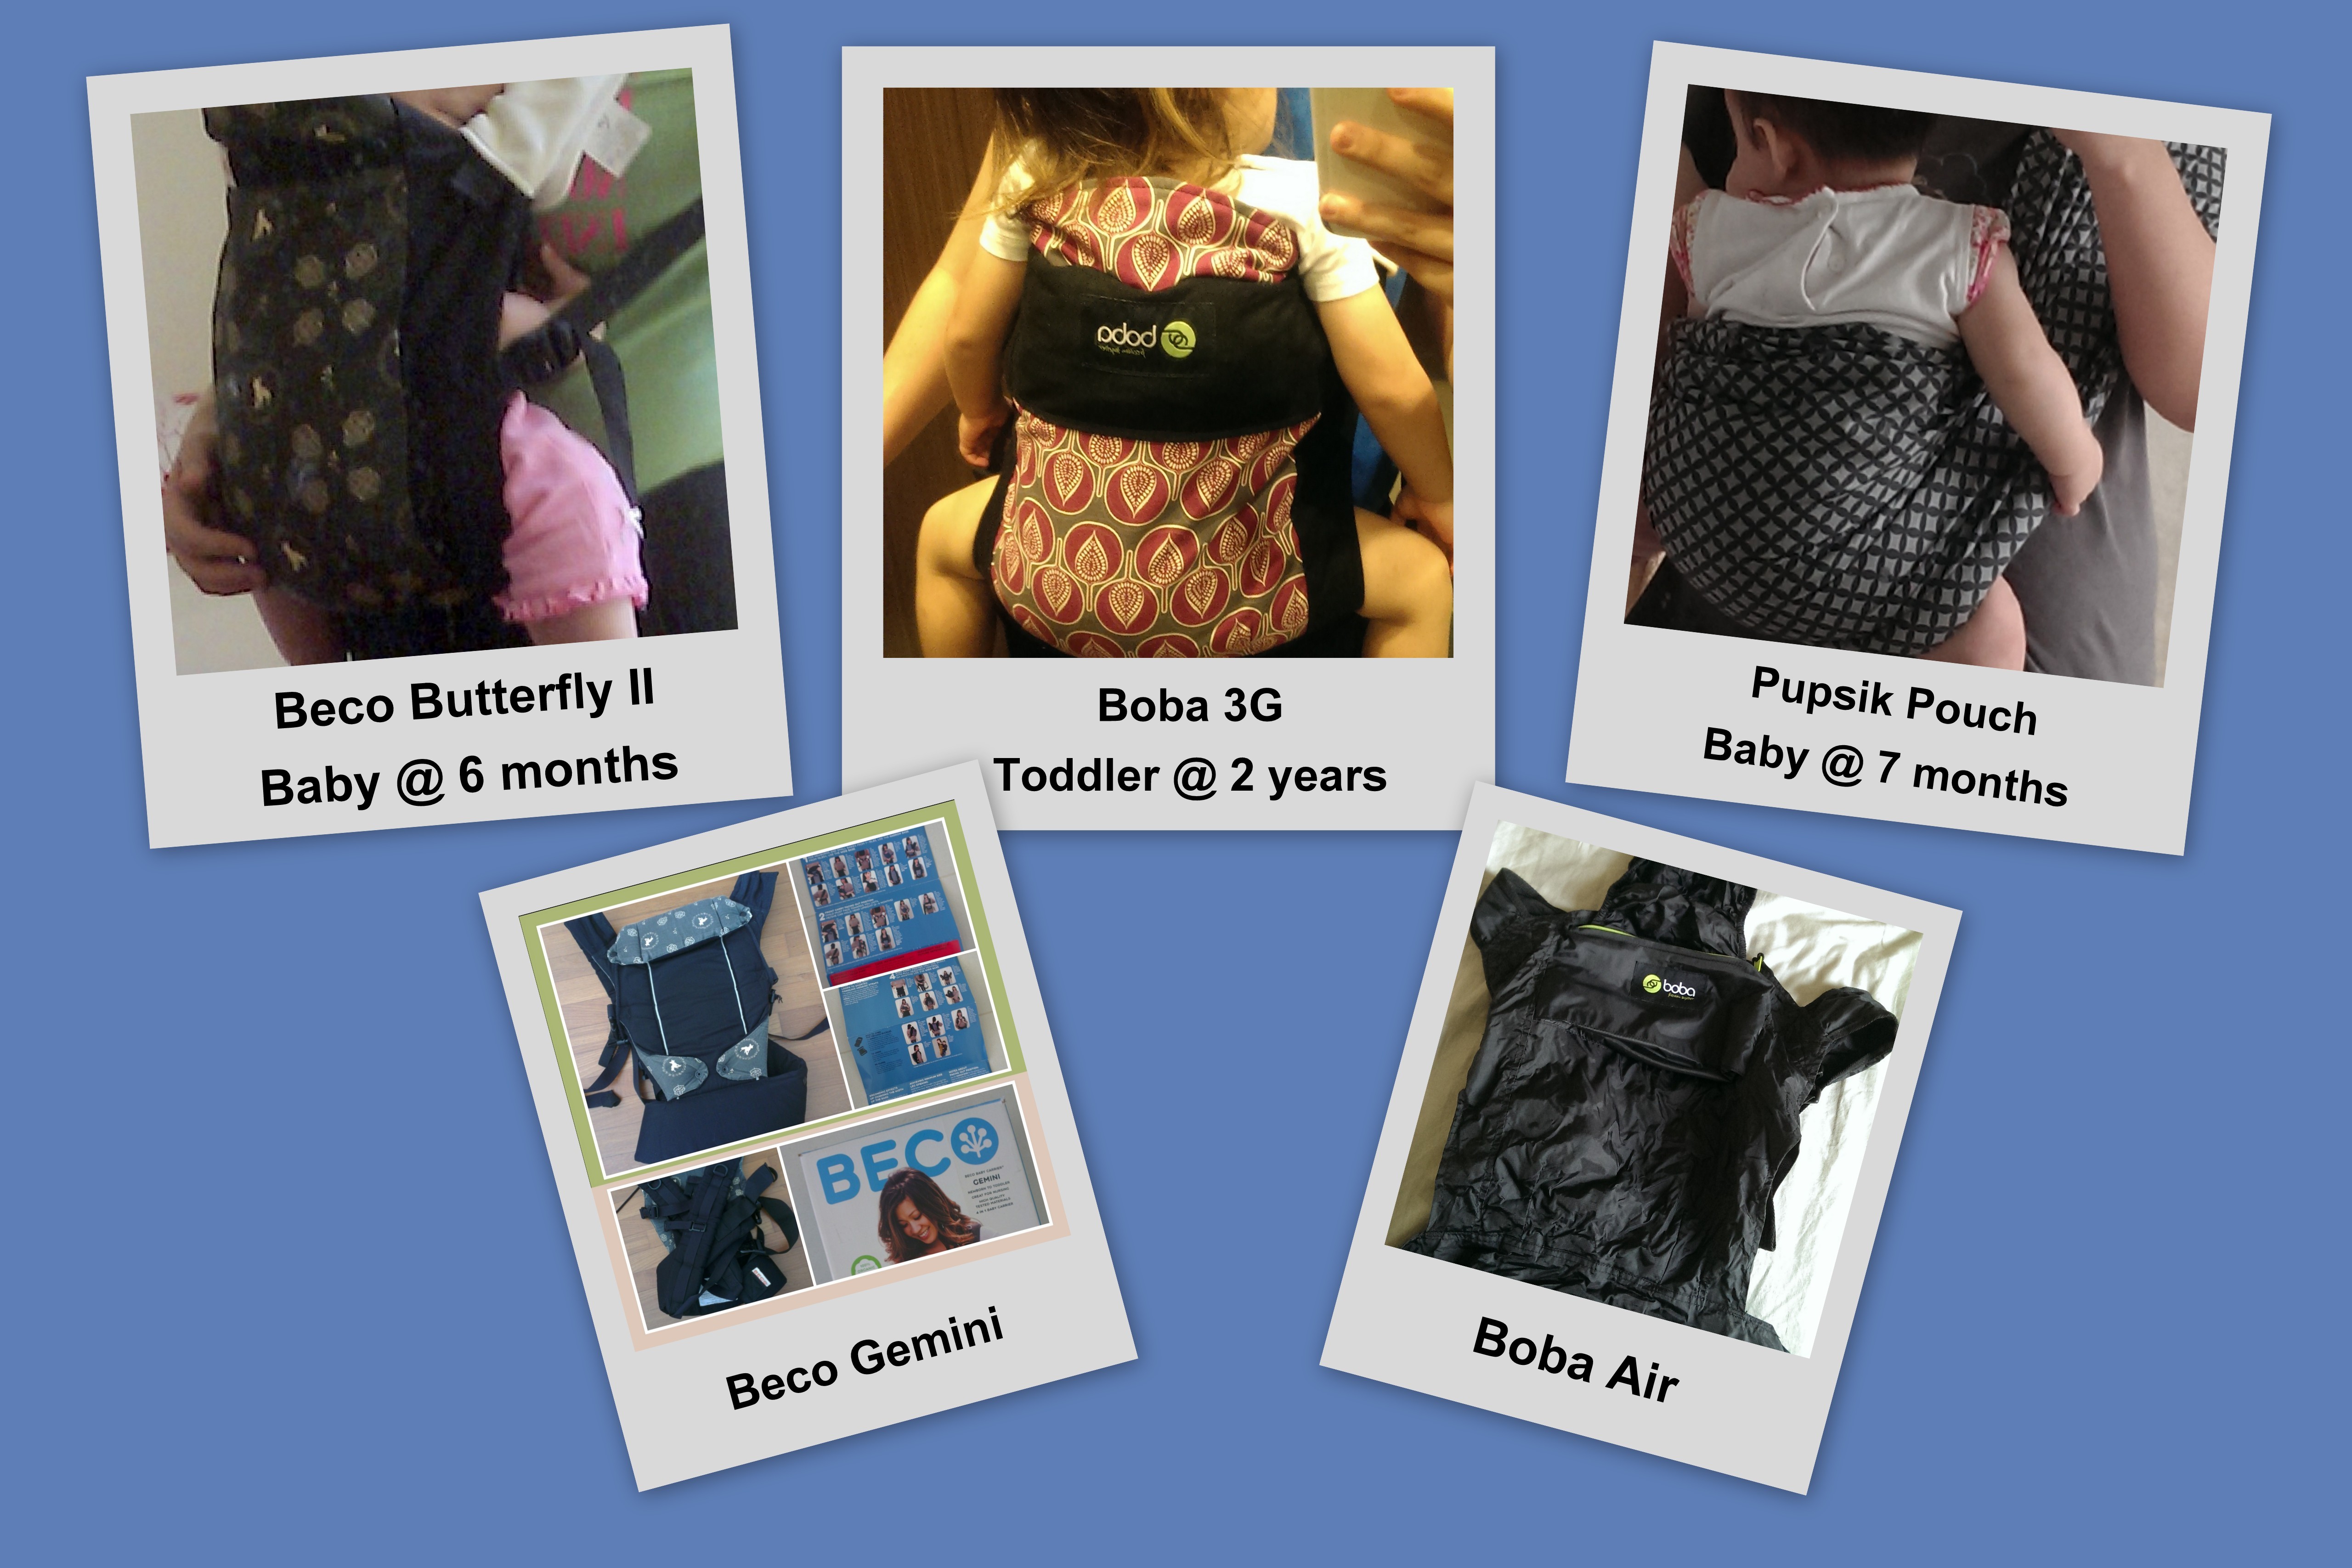 picolo baby carrier website